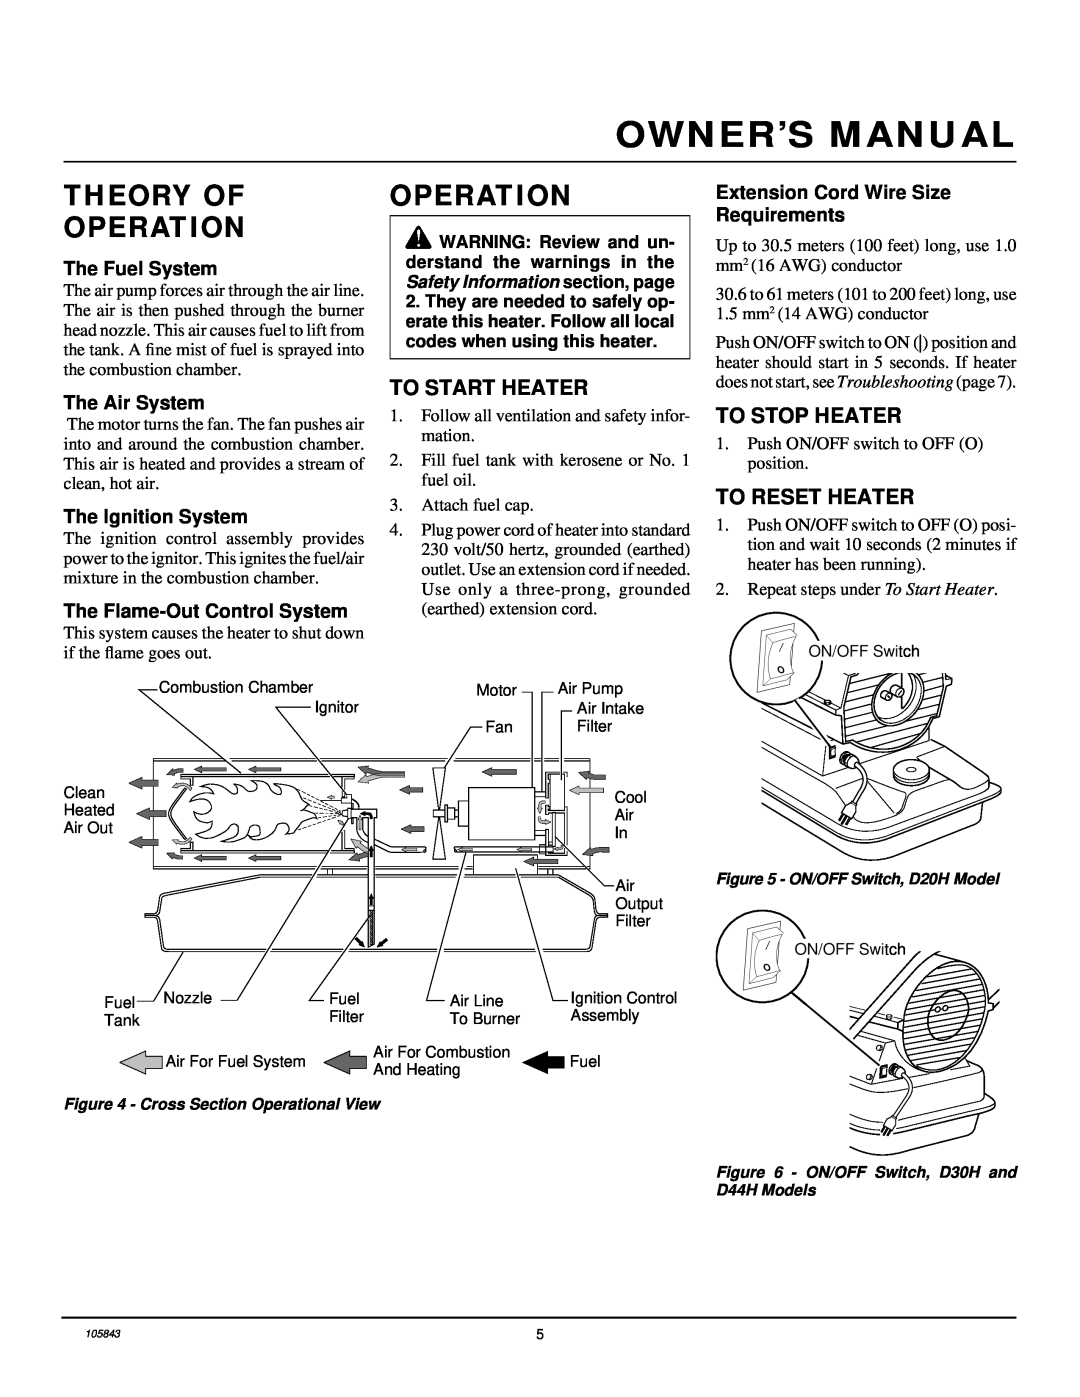 Desa D20H, D44H, D30H owner manual Theory Of Operation, To Start Heater, To Stop Heater, To Reset Heater 